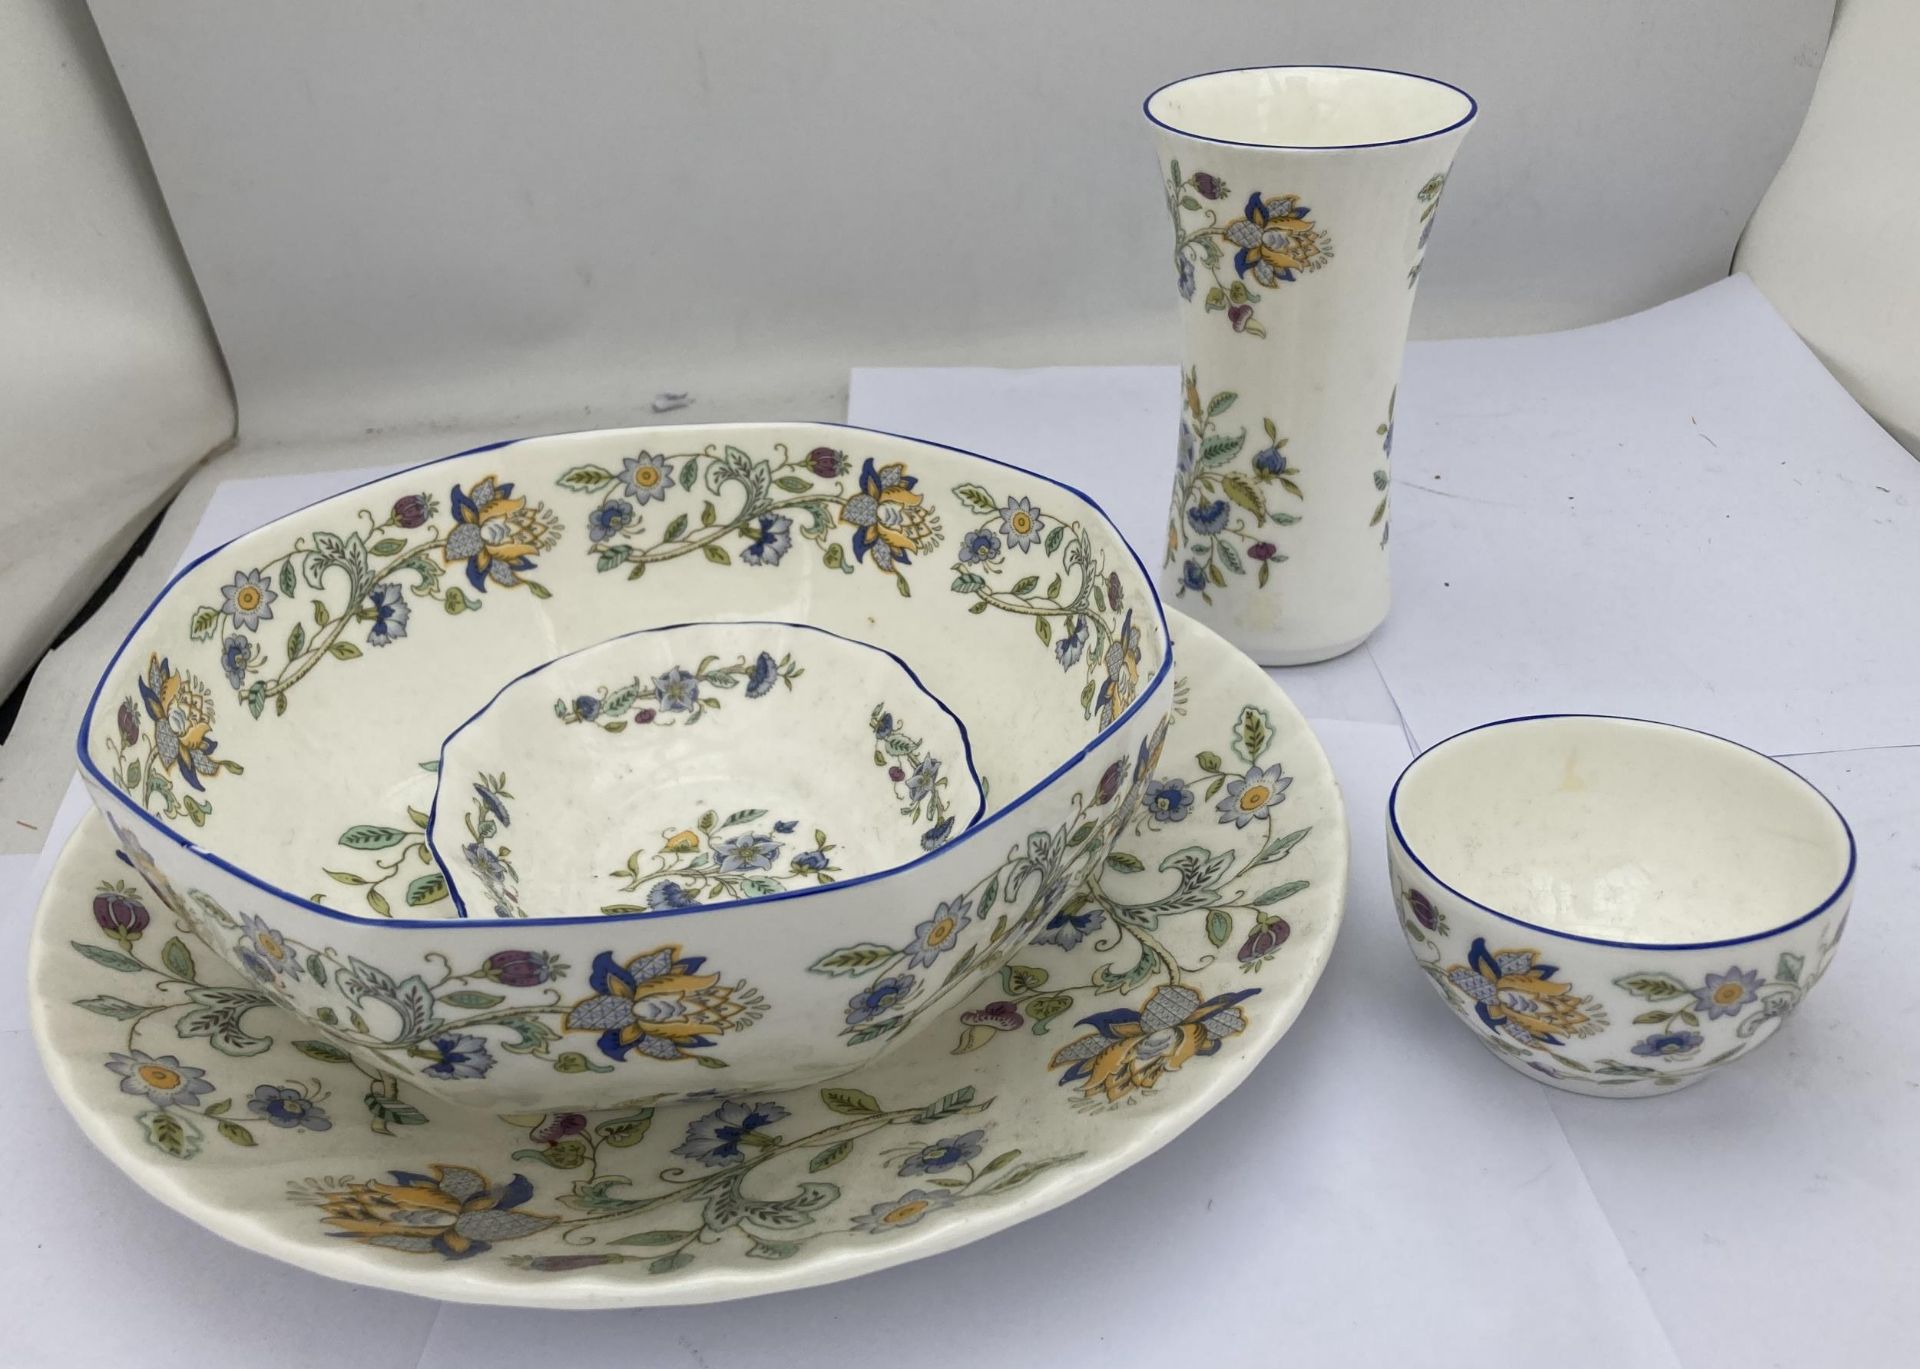 A GROUP OF MINTON HADDON HALL BLUE ITEMS - FRUIT BOWL ETC